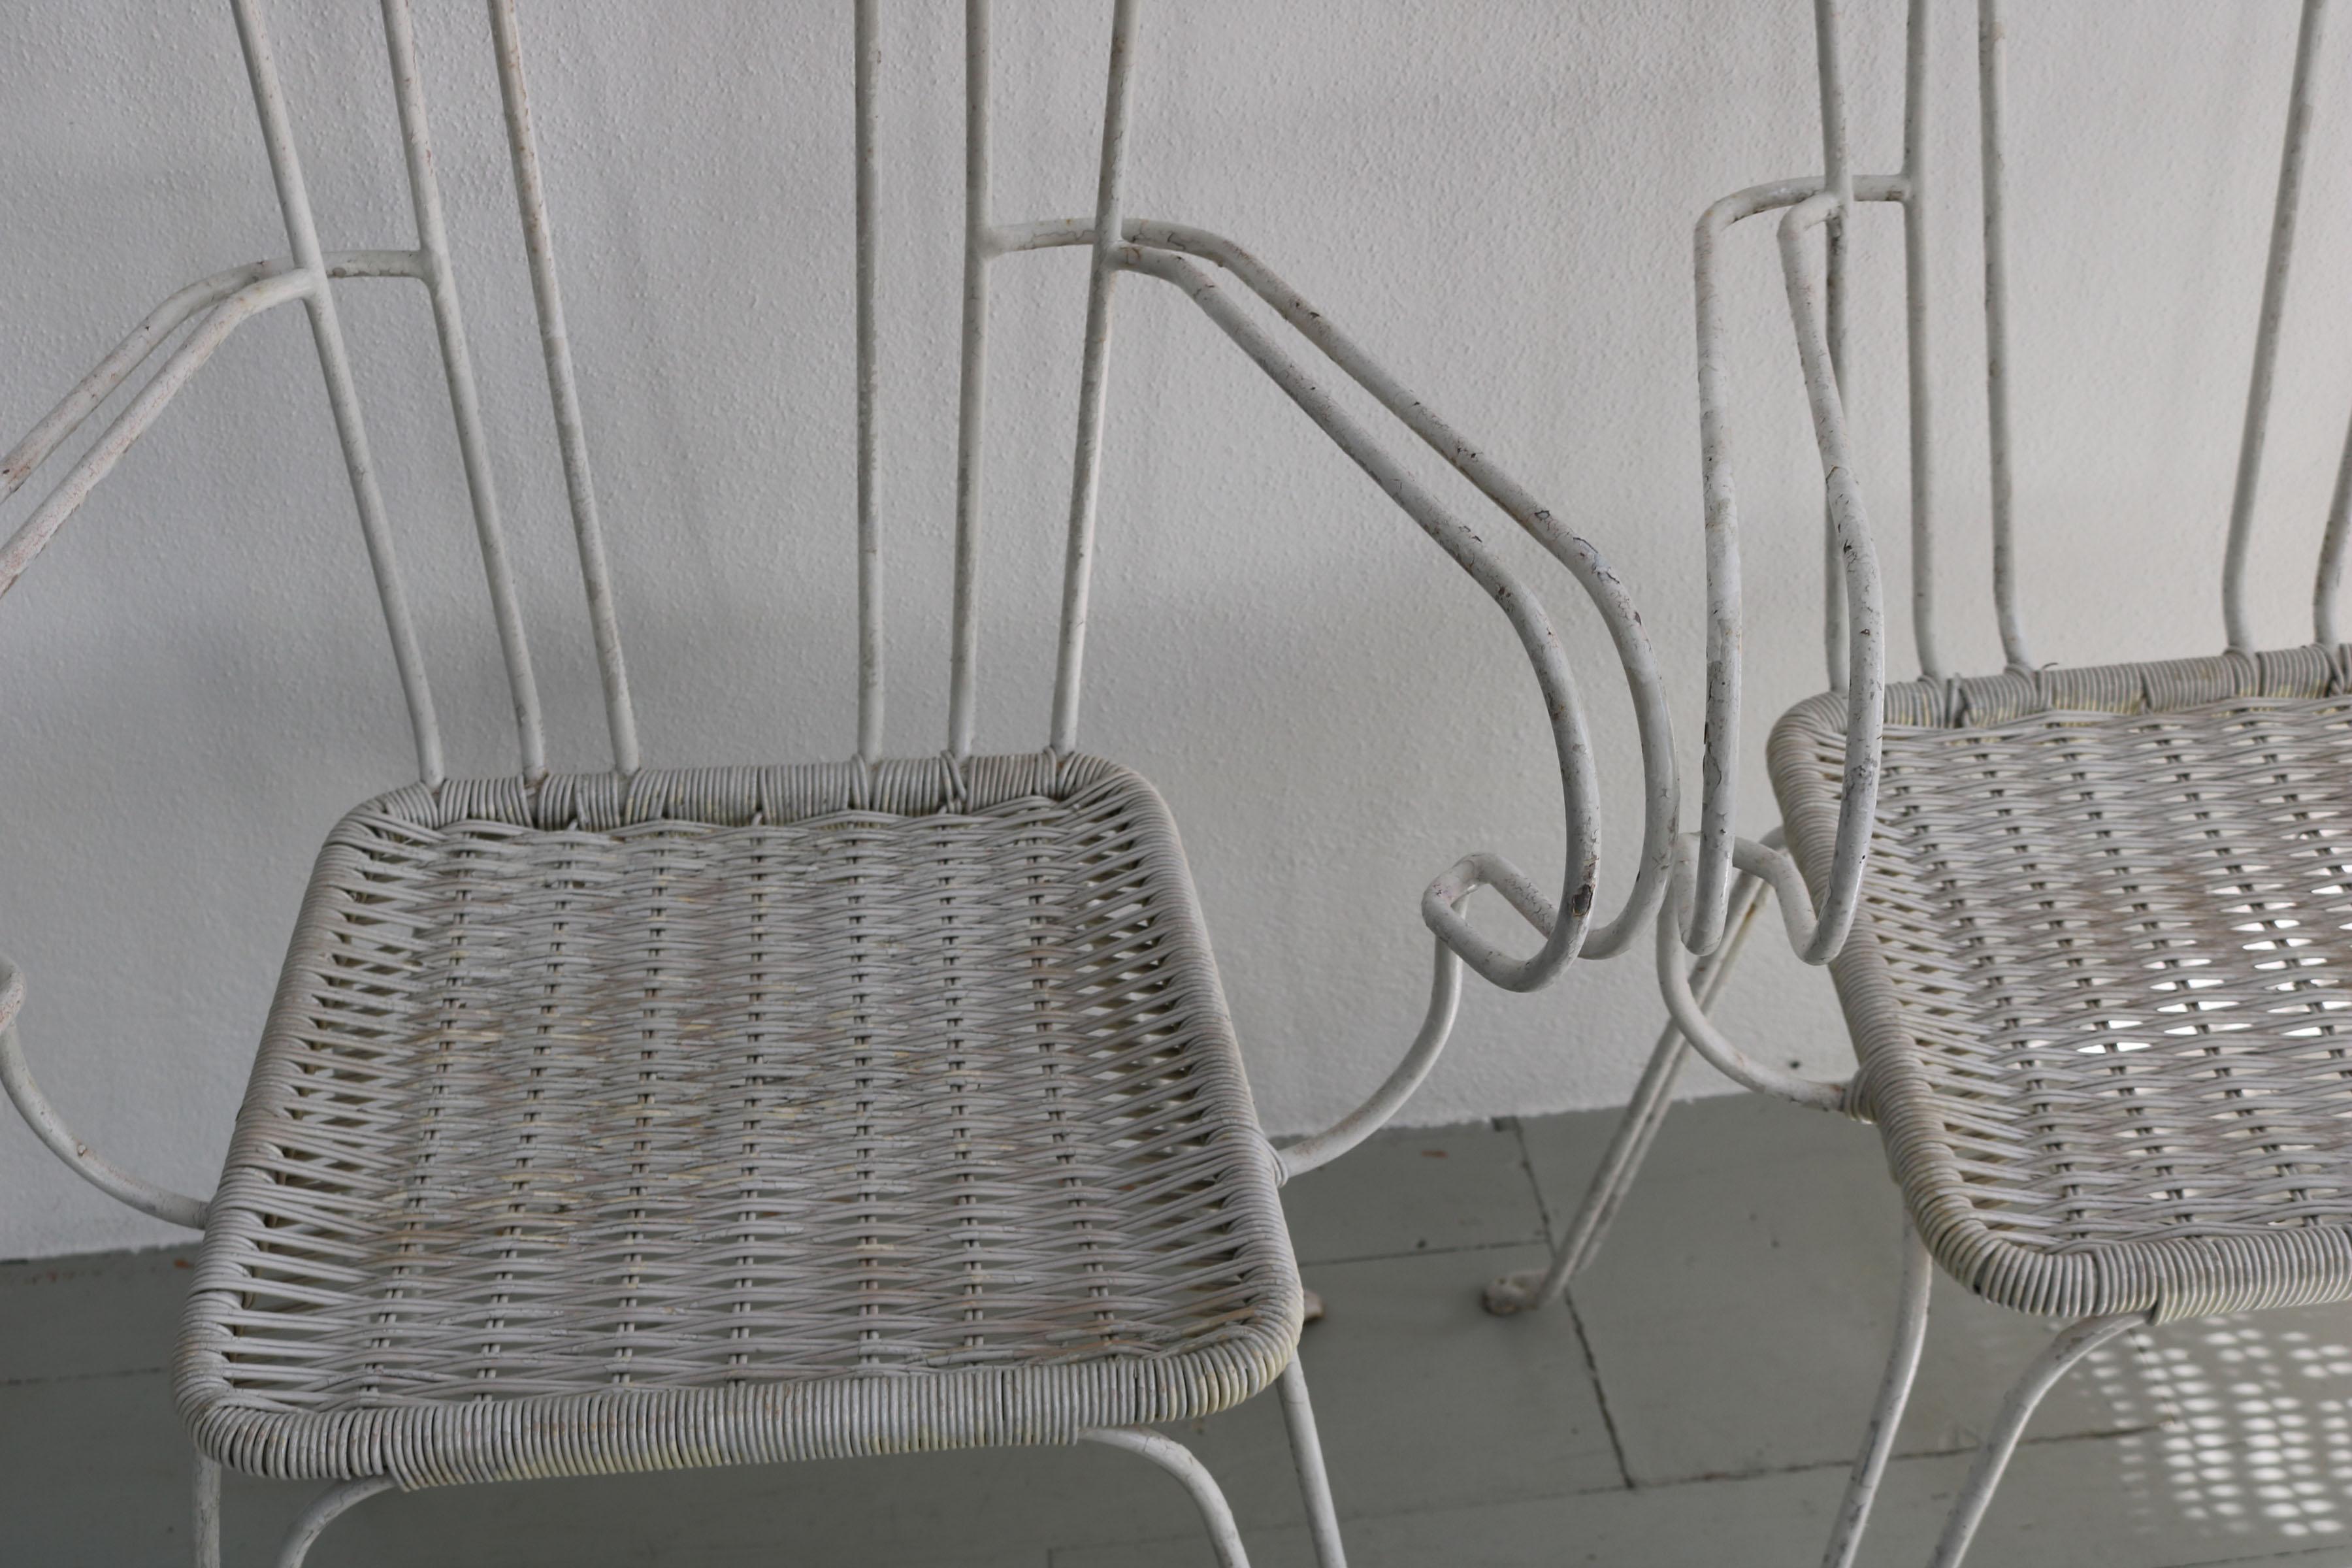 Set of 5 White Garden Chairs with Woven Plastic Seats, Italy, 1960s For Sale 11